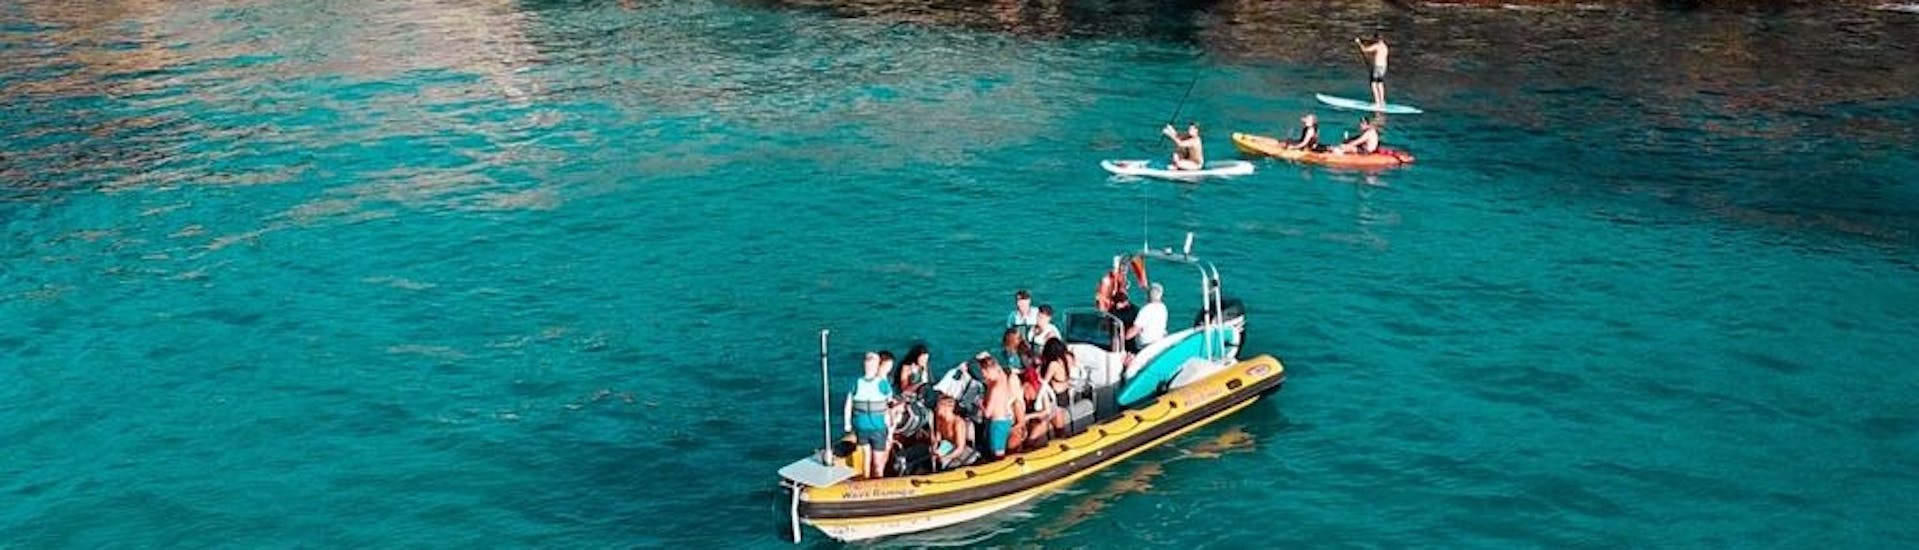 Participants on a speedboat stopping for a swim in the turquoise waters in Alcudia Bay during a boat trip from Can Picafort to Llevant Natural Park with North Coast Adventure Mallorca.